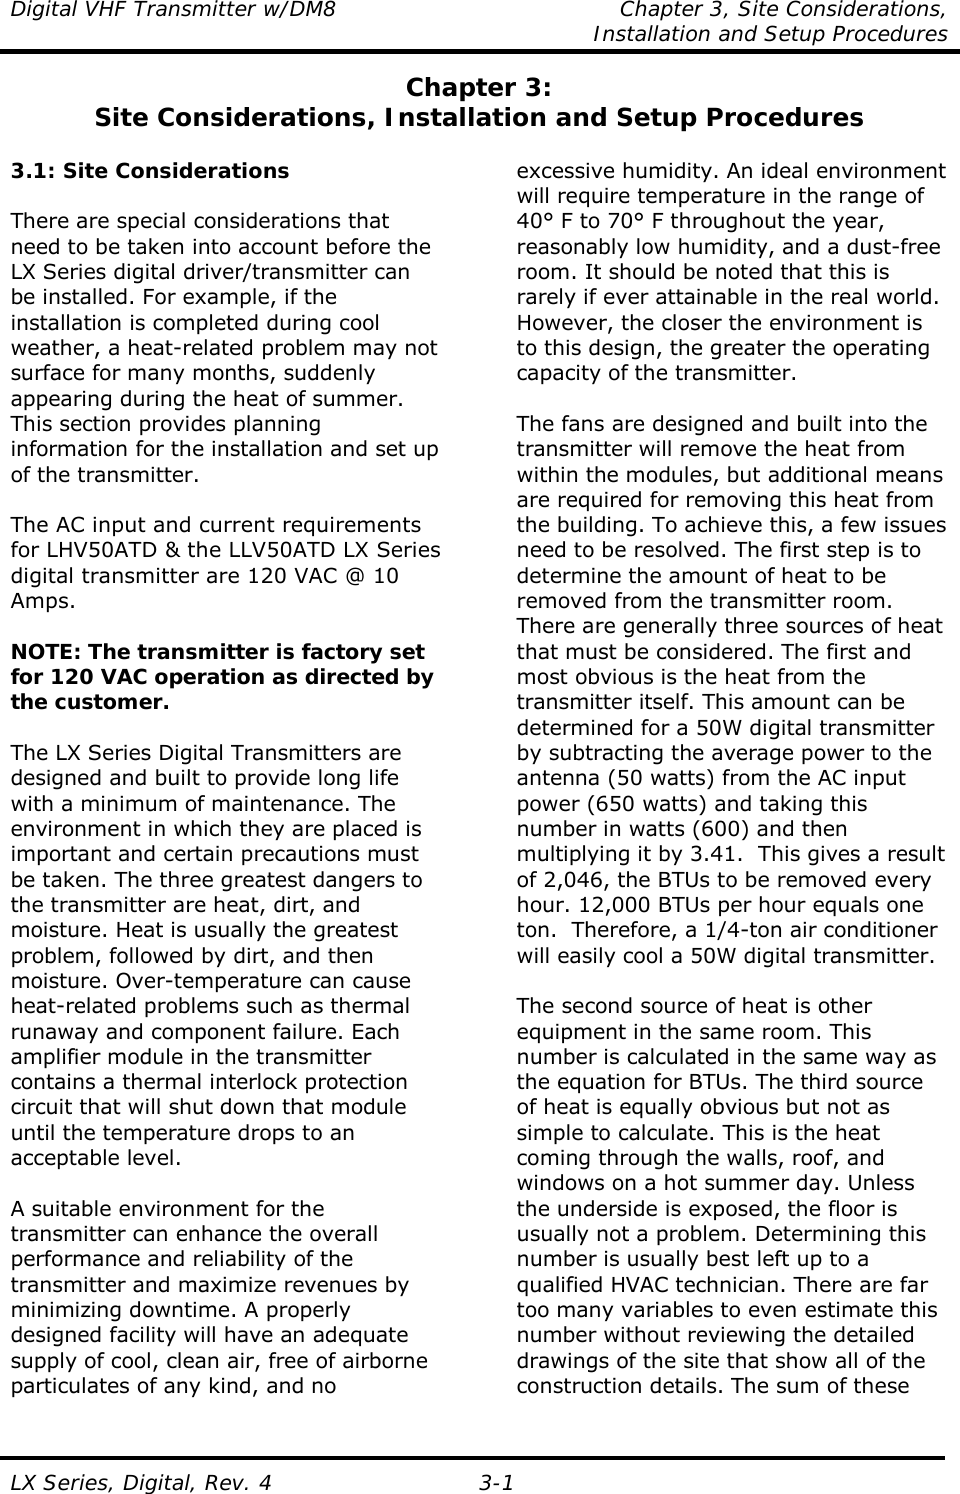 Digital VHF Transmitter w/DM8  Chapter 3, Site Considerations,    Installation and Setup Procedures  LX Series, Digital, Rev. 4 3-1 Chapter 3: Site Considerations, Installation and Setup Procedures  3.1: Site Considerations  There are special considerations that need to be taken into account before the LX Series digital driver/transmitter can be installed. For example, if the installation is completed during cool weather, a heat-related problem may not surface for many months, suddenly appearing during the heat of summer. This section provides planning information for the installation and set up of the transmitter.  The AC input and current requirements for LHV50ATD &amp; the LLV50ATD LX Series digital transmitter are 120 VAC @ 10 Amps.  NOTE: The transmitter is factory set for 120 VAC operation as directed by the customer.  The LX Series Digital Transmitters are designed and built to provide long life with a minimum of maintenance. The environment in which they are placed is important and certain precautions must be taken. The three greatest dangers to the transmitter are heat, dirt, and moisture. Heat is usually the greatest problem, followed by dirt, and then moisture. Over-temperature can cause heat-related problems such as thermal runaway and component failure. Each amplifier module in the transmitter contains a thermal interlock protection circuit that will shut down that module until the temperature drops to an acceptable level.  A suitable environment for the transmitter can enhance the overall performance and reliability of the transmitter and maximize revenues by minimizing downtime. A properly designed facility will have an adequate supply of cool, clean air, free of airborne particulates of any kind, and no excessive humidity. An ideal environment will require temperature in the range of 40° F to 70° F throughout the year, reasonably low humidity, and a dust-free room. It should be noted that this is rarely if ever attainable in the real world. However, the closer the environment is to this design, the greater the operating capacity of the transmitter.  The fans are designed and built into the transmitter will remove the heat from within the modules, but additional means are required for removing this heat from the building. To achieve this, a few issues need to be resolved. The first step is to determine the amount of heat to be removed from the transmitter room. There are generally three sources of heat that must be considered. The first and most obvious is the heat from the transmitter itself. This amount can be determined for a 50W digital transmitter by subtracting the average power to the antenna (50 watts) from the AC input power (650 watts) and taking this number in watts (600) and then multiplying it by 3.41.  This gives a result of 2,046, the BTUs to be removed every hour. 12,000 BTUs per hour equals one ton.  Therefore, a 1/4-ton air conditioner will easily cool a 50W digital transmitter.  The second source of heat is other equipment in the same room. This number is calculated in the same way as the equation for BTUs. The third source of heat is equally obvious but not as simple to calculate. This is the heat coming through the walls, roof, and windows on a hot summer day. Unless the underside is exposed, the floor is usually not a problem. Determining this number is usually best left up to a qualified HVAC technician. There are far too many variables to even estimate this number without reviewing the detailed drawings of the site that show all of the construction details. The sum of these 